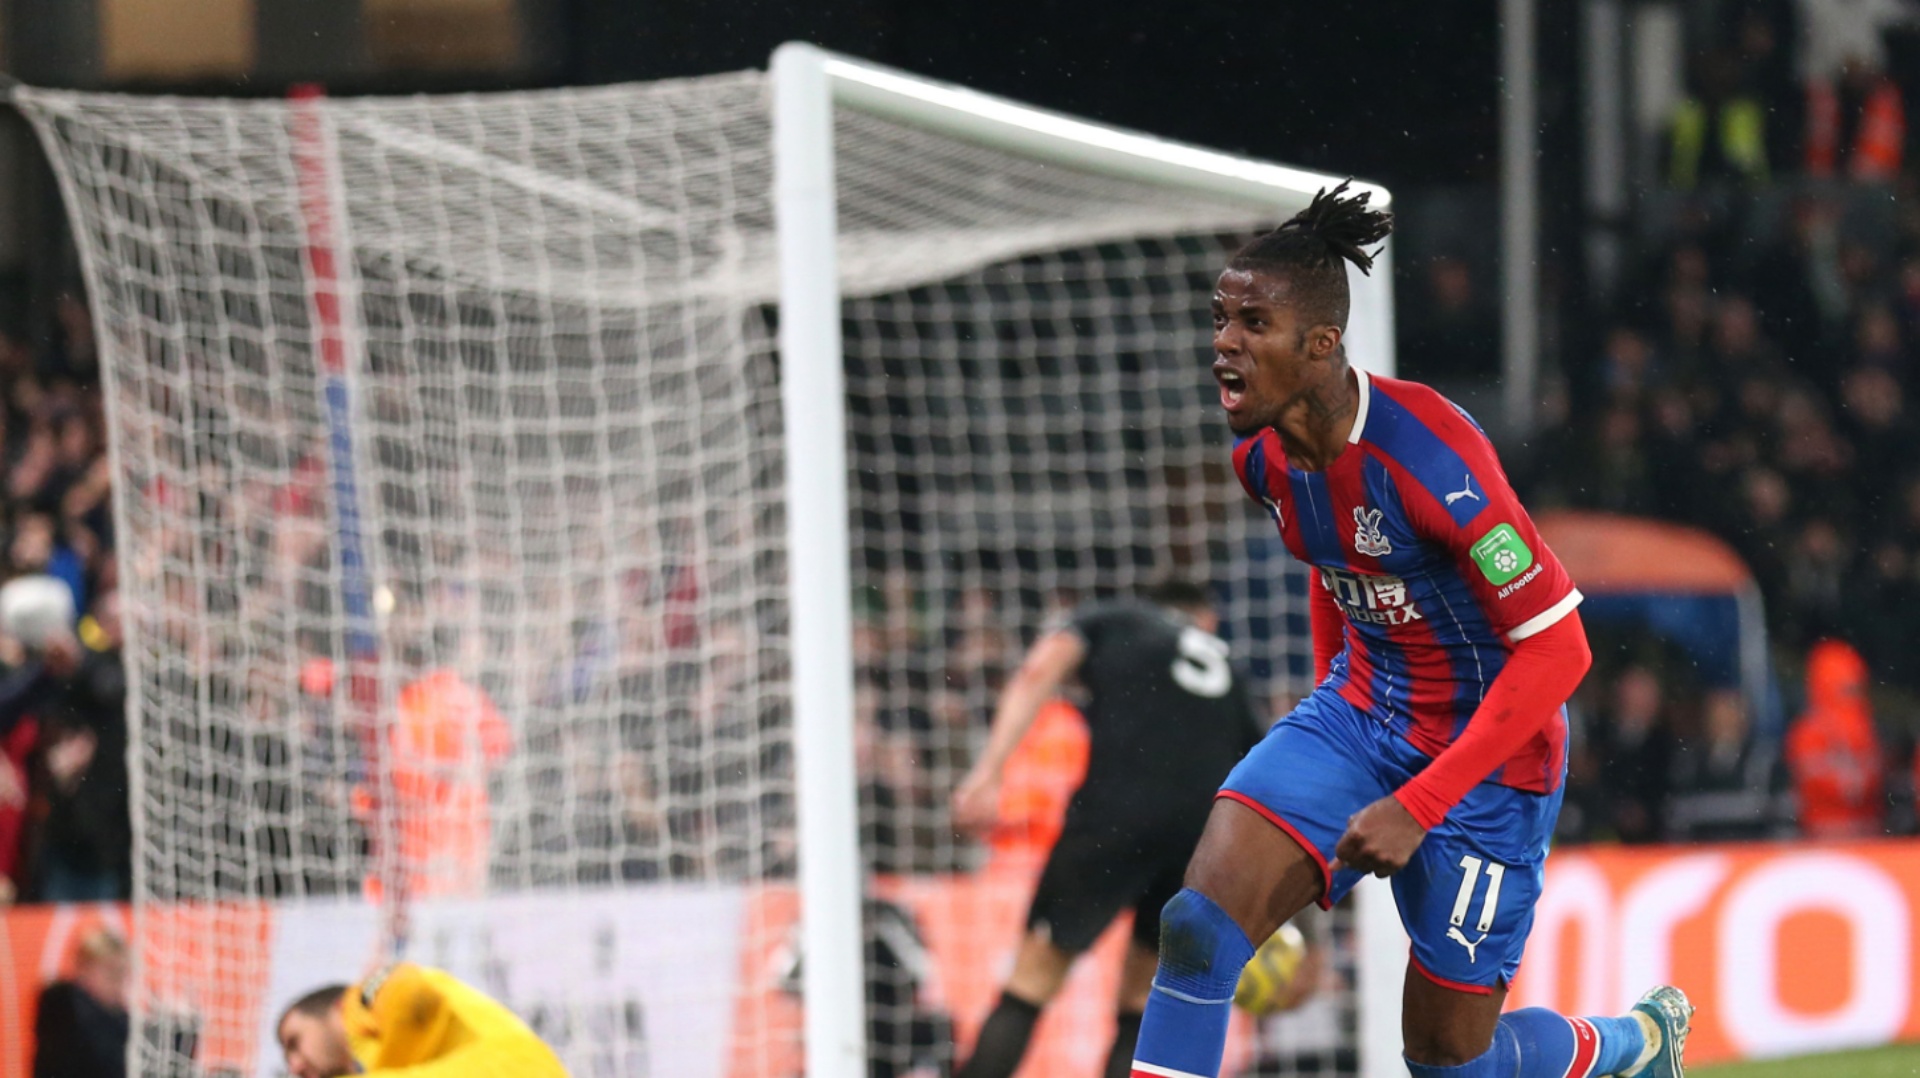 'Every goal I score is important' - Crystal Palace's Wilfried Zaha reflects on Brighton draw